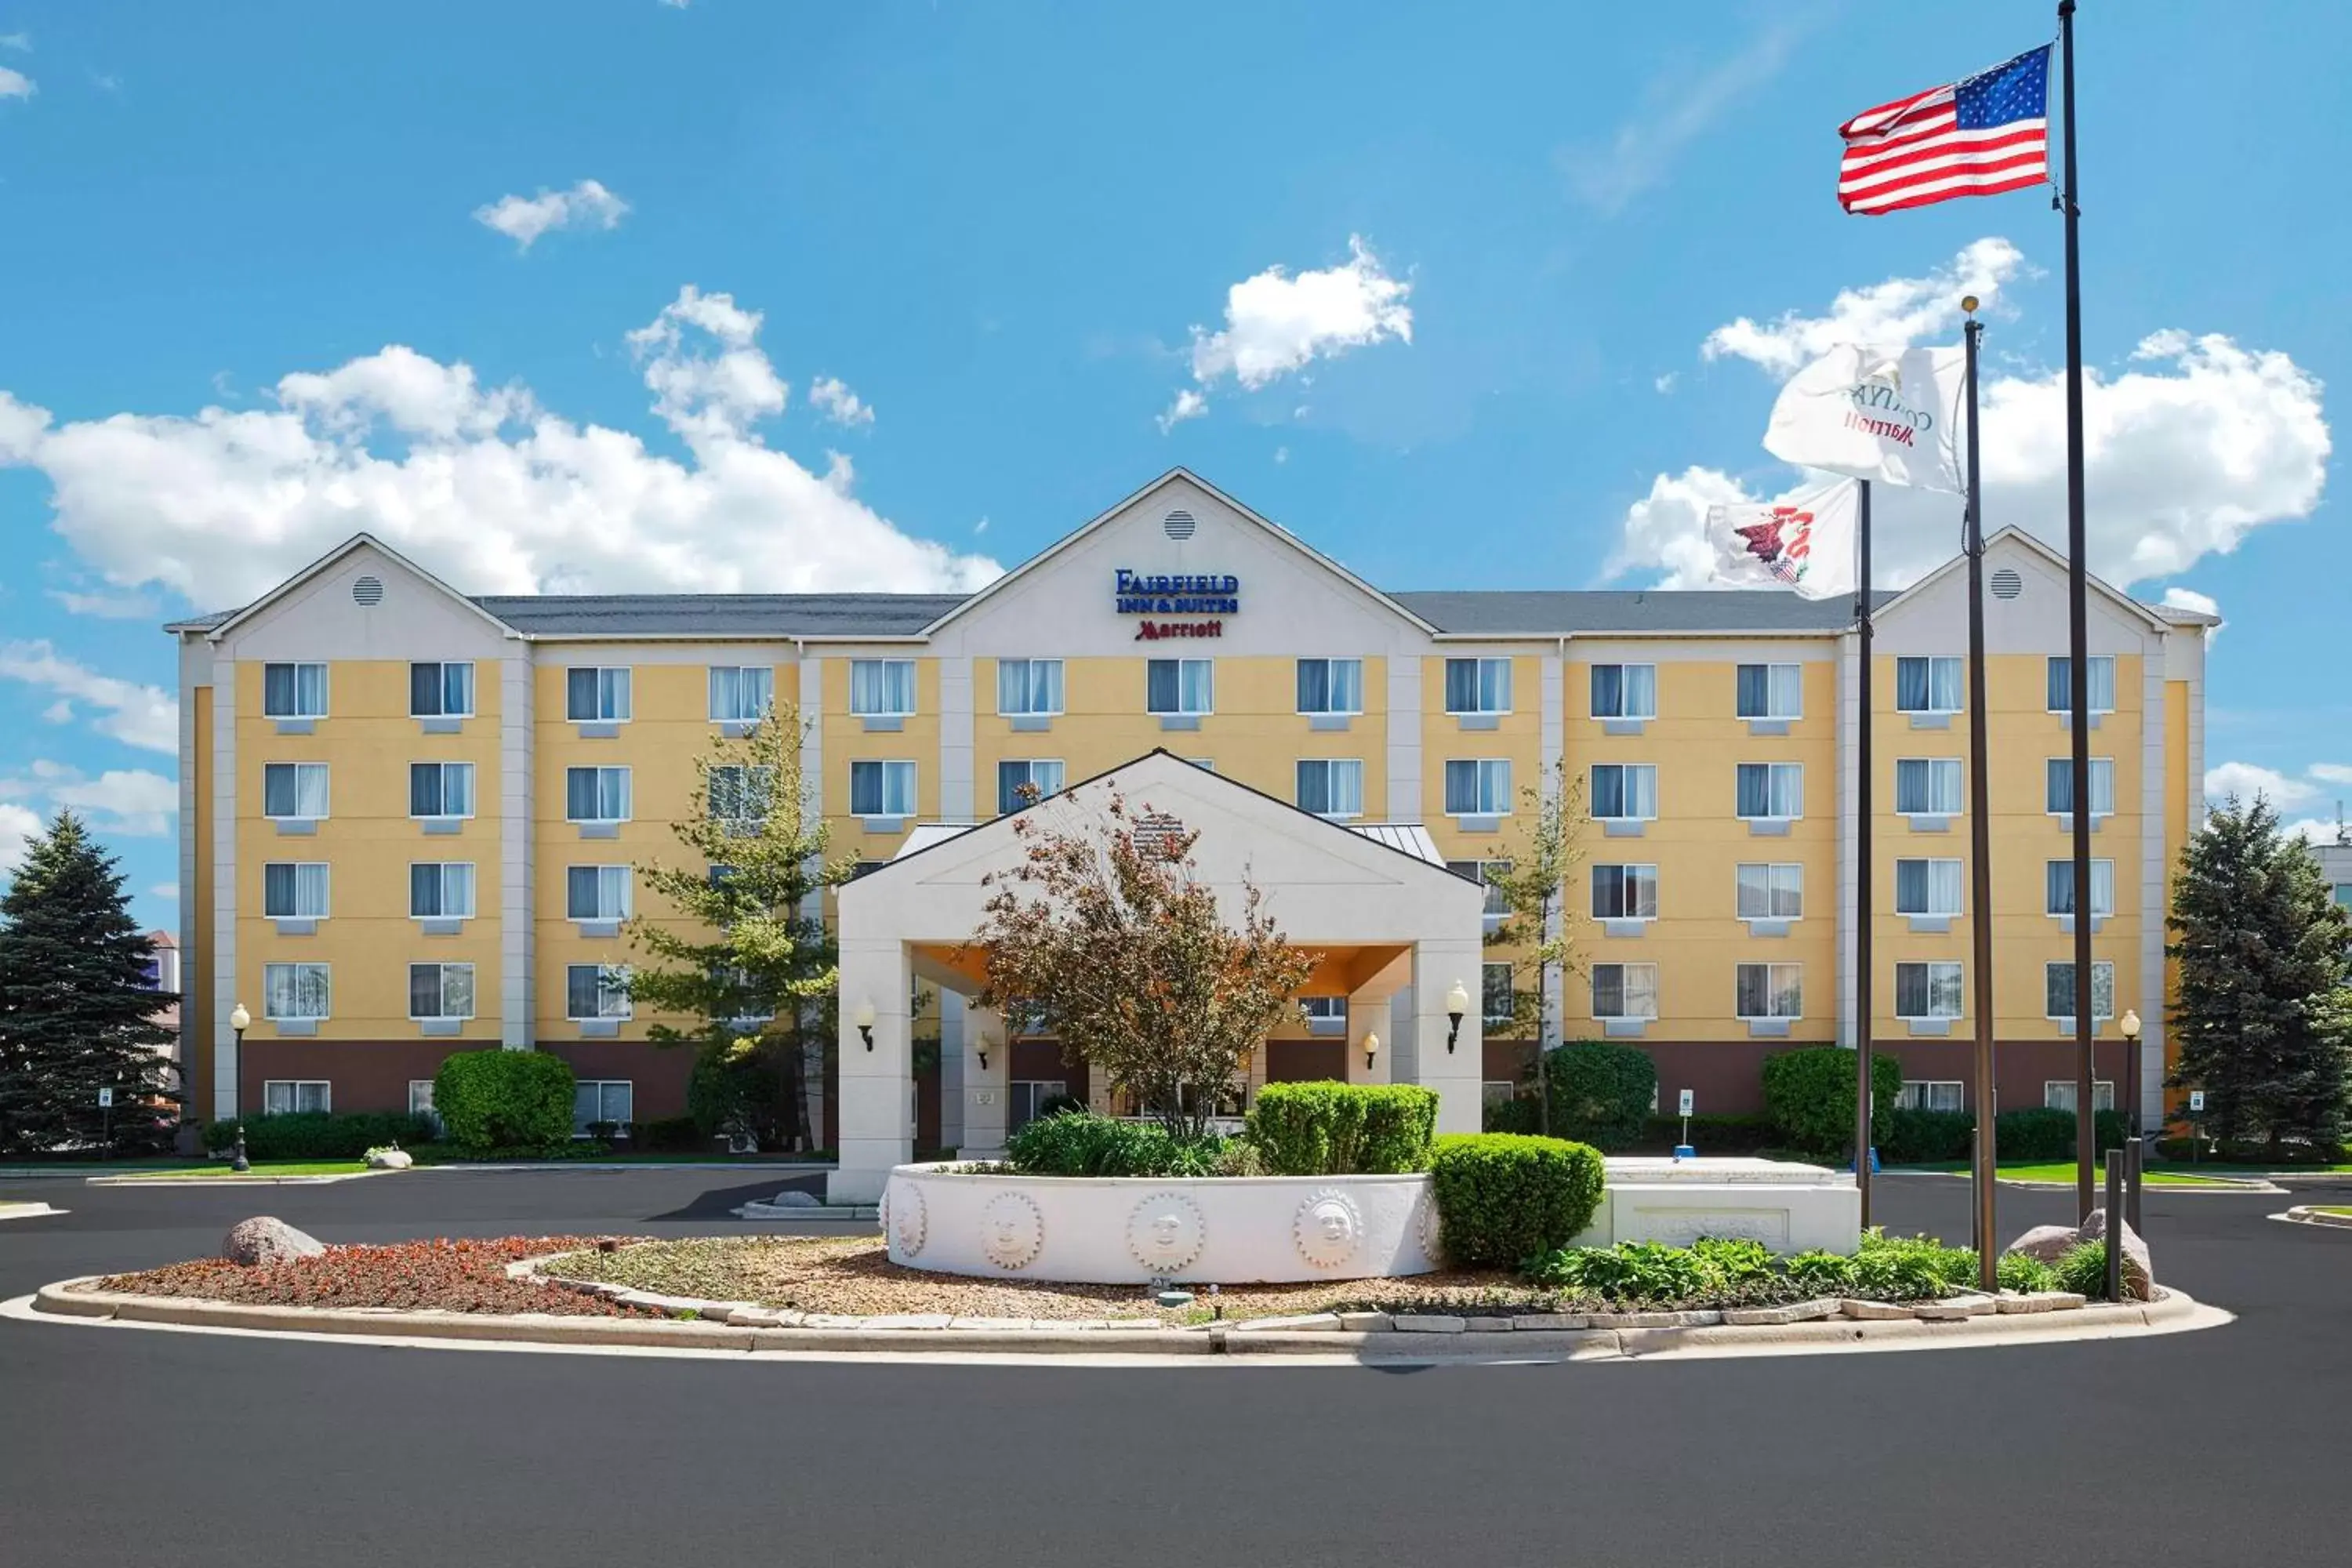 Property Building in Fairfield Inn & Suites Chicago Midway Airport